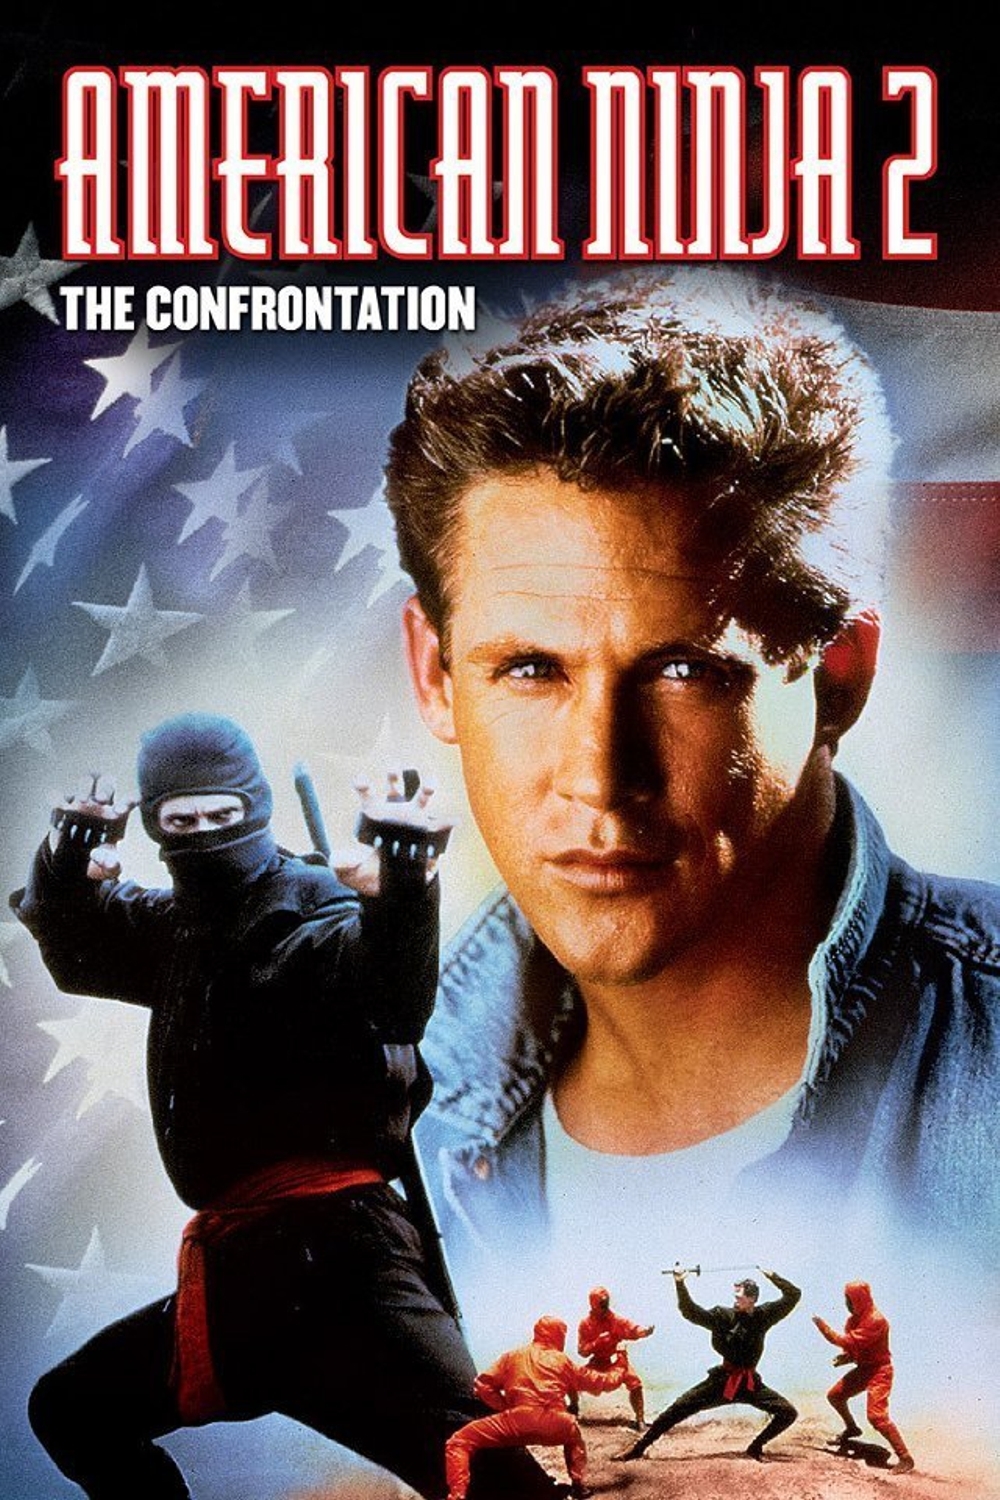 Poster for the movie "American Ninja 2: The Confrontation"